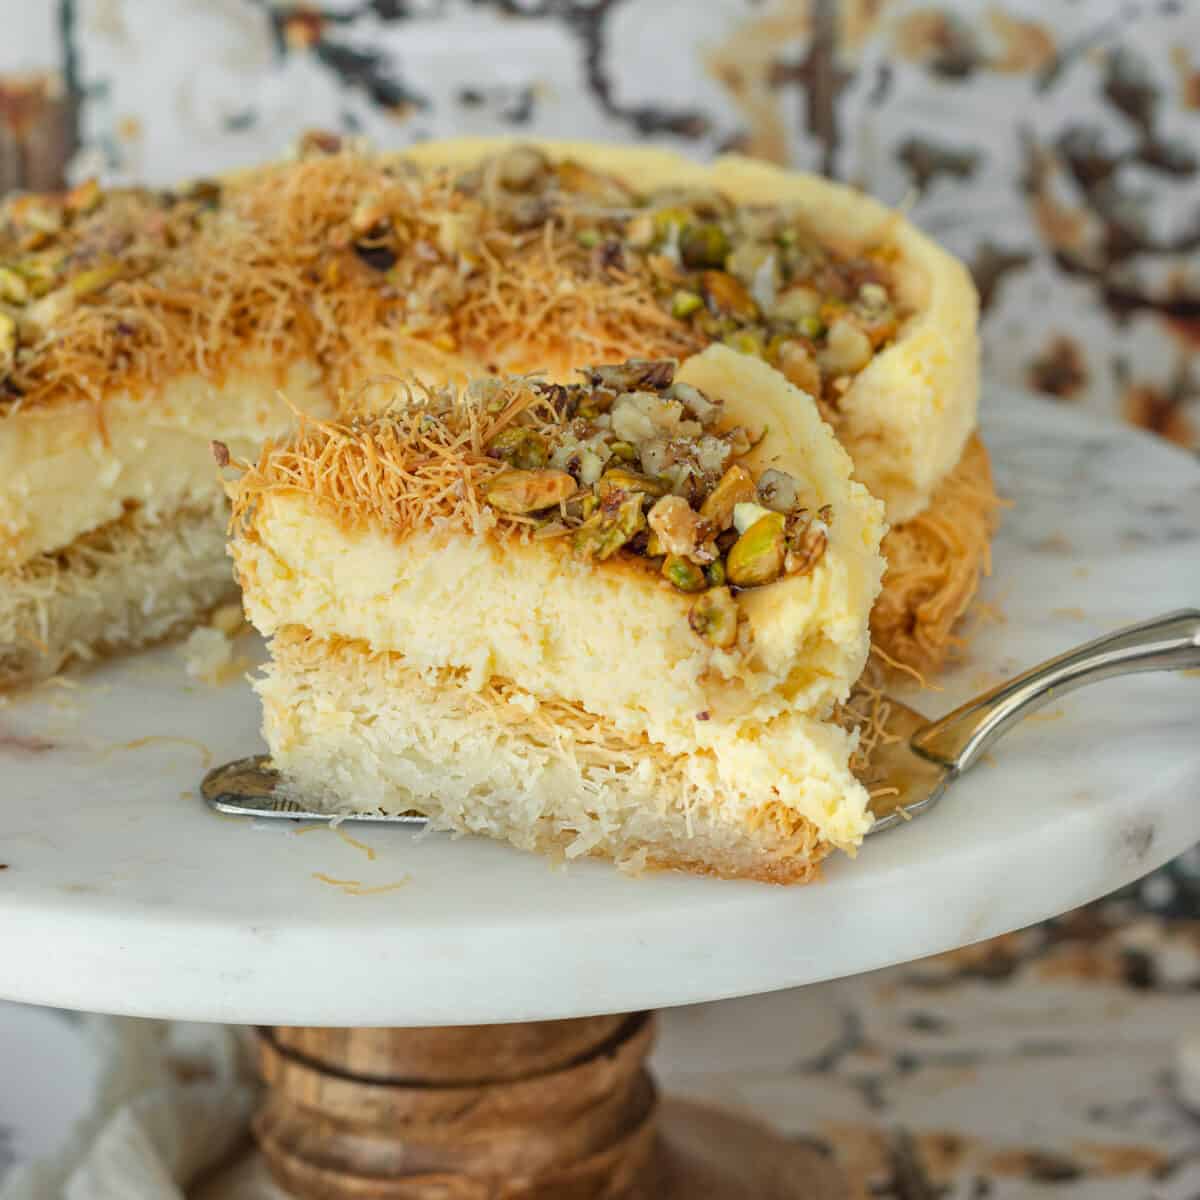 Kataifi Cheesecake with Walnuts and Pistachios